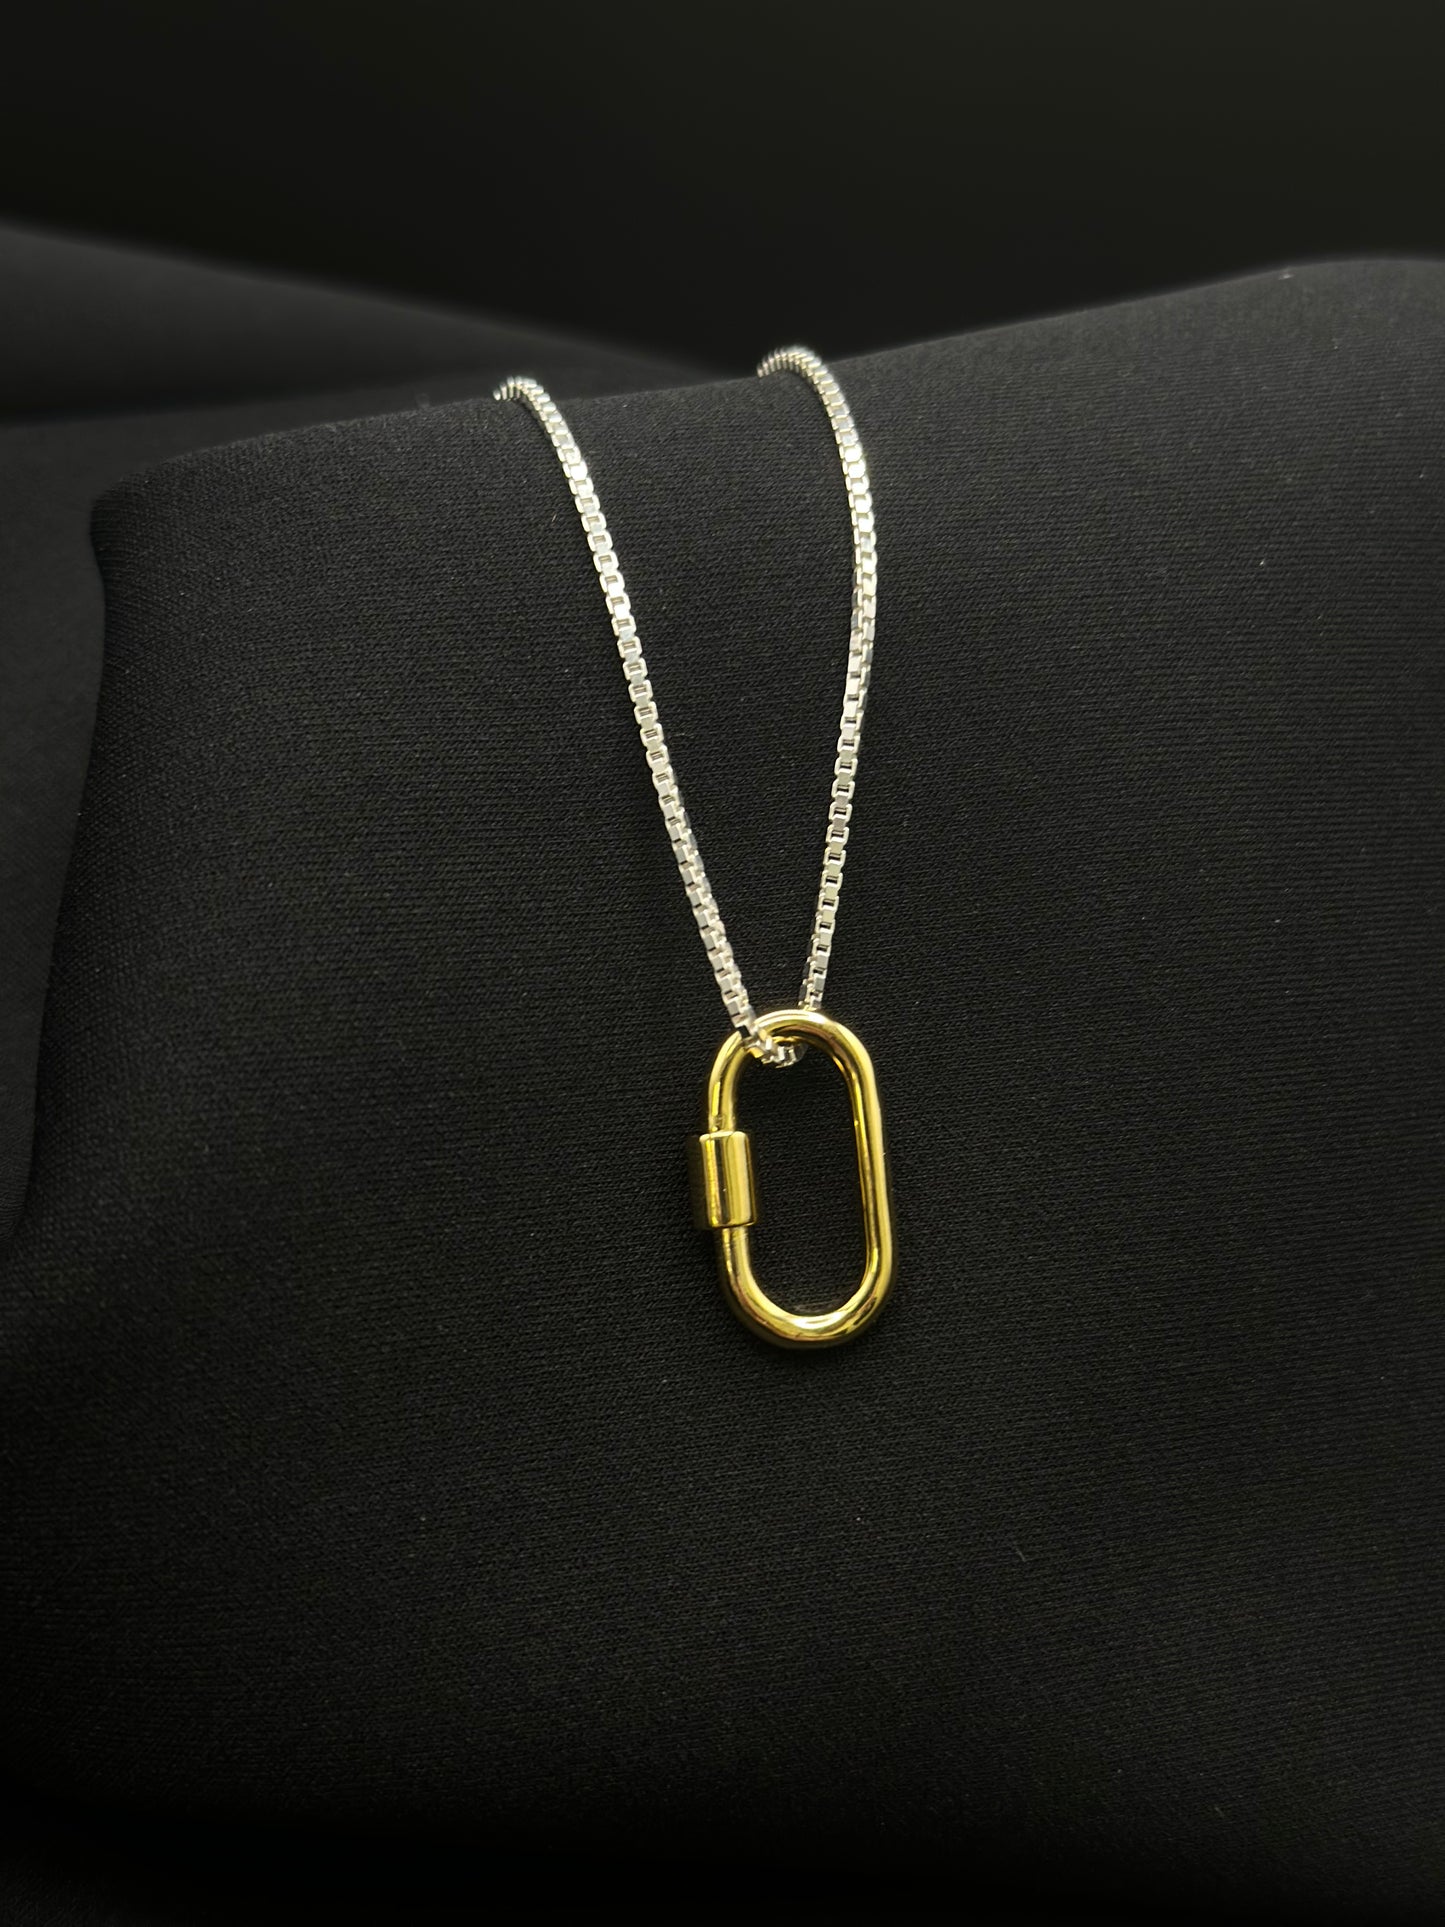 The Gold Plated Sterling Silver Lock Necklace